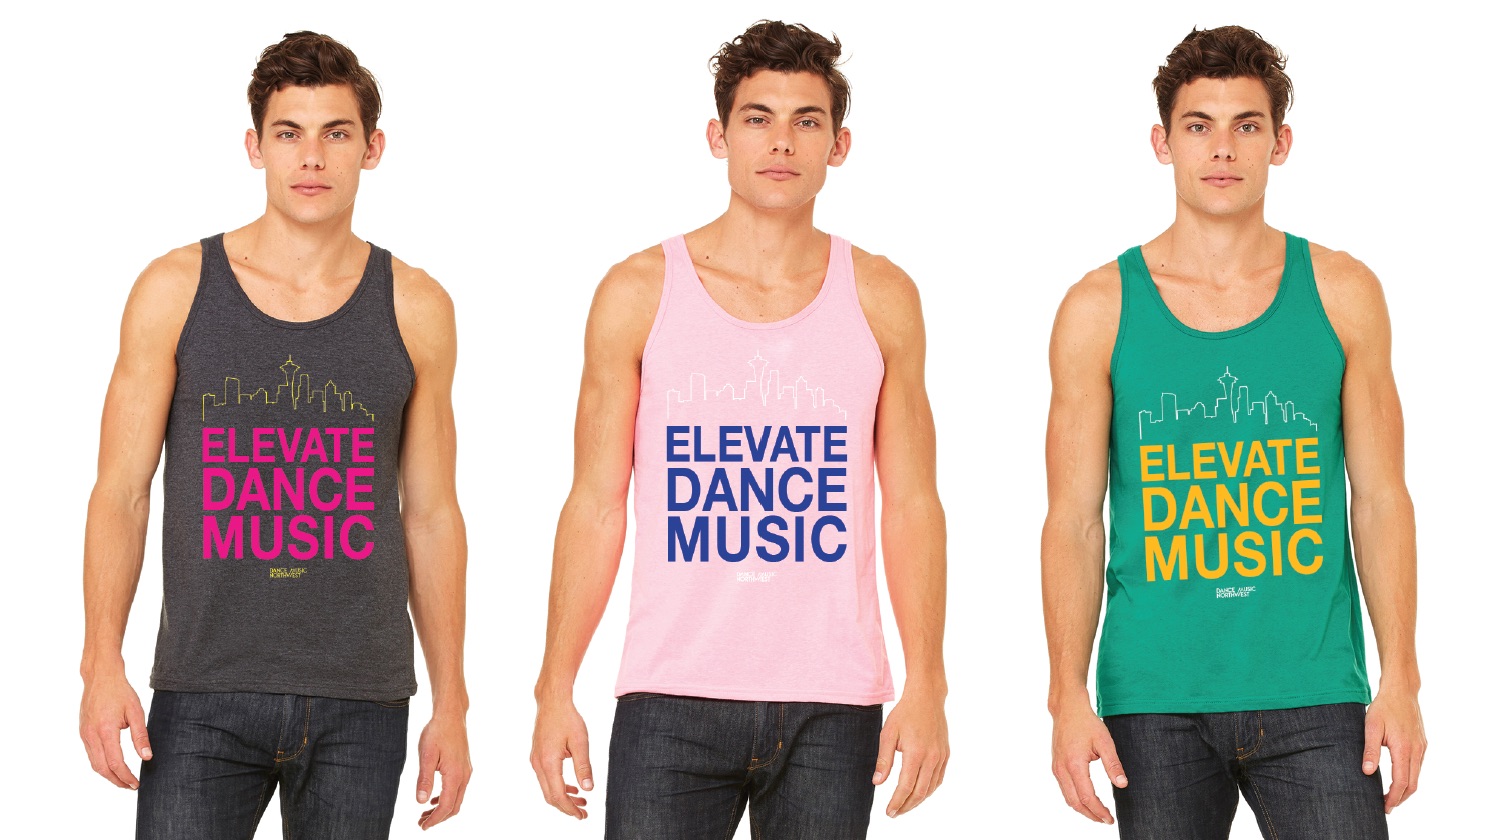 elevate dance music tank top re-release feature image